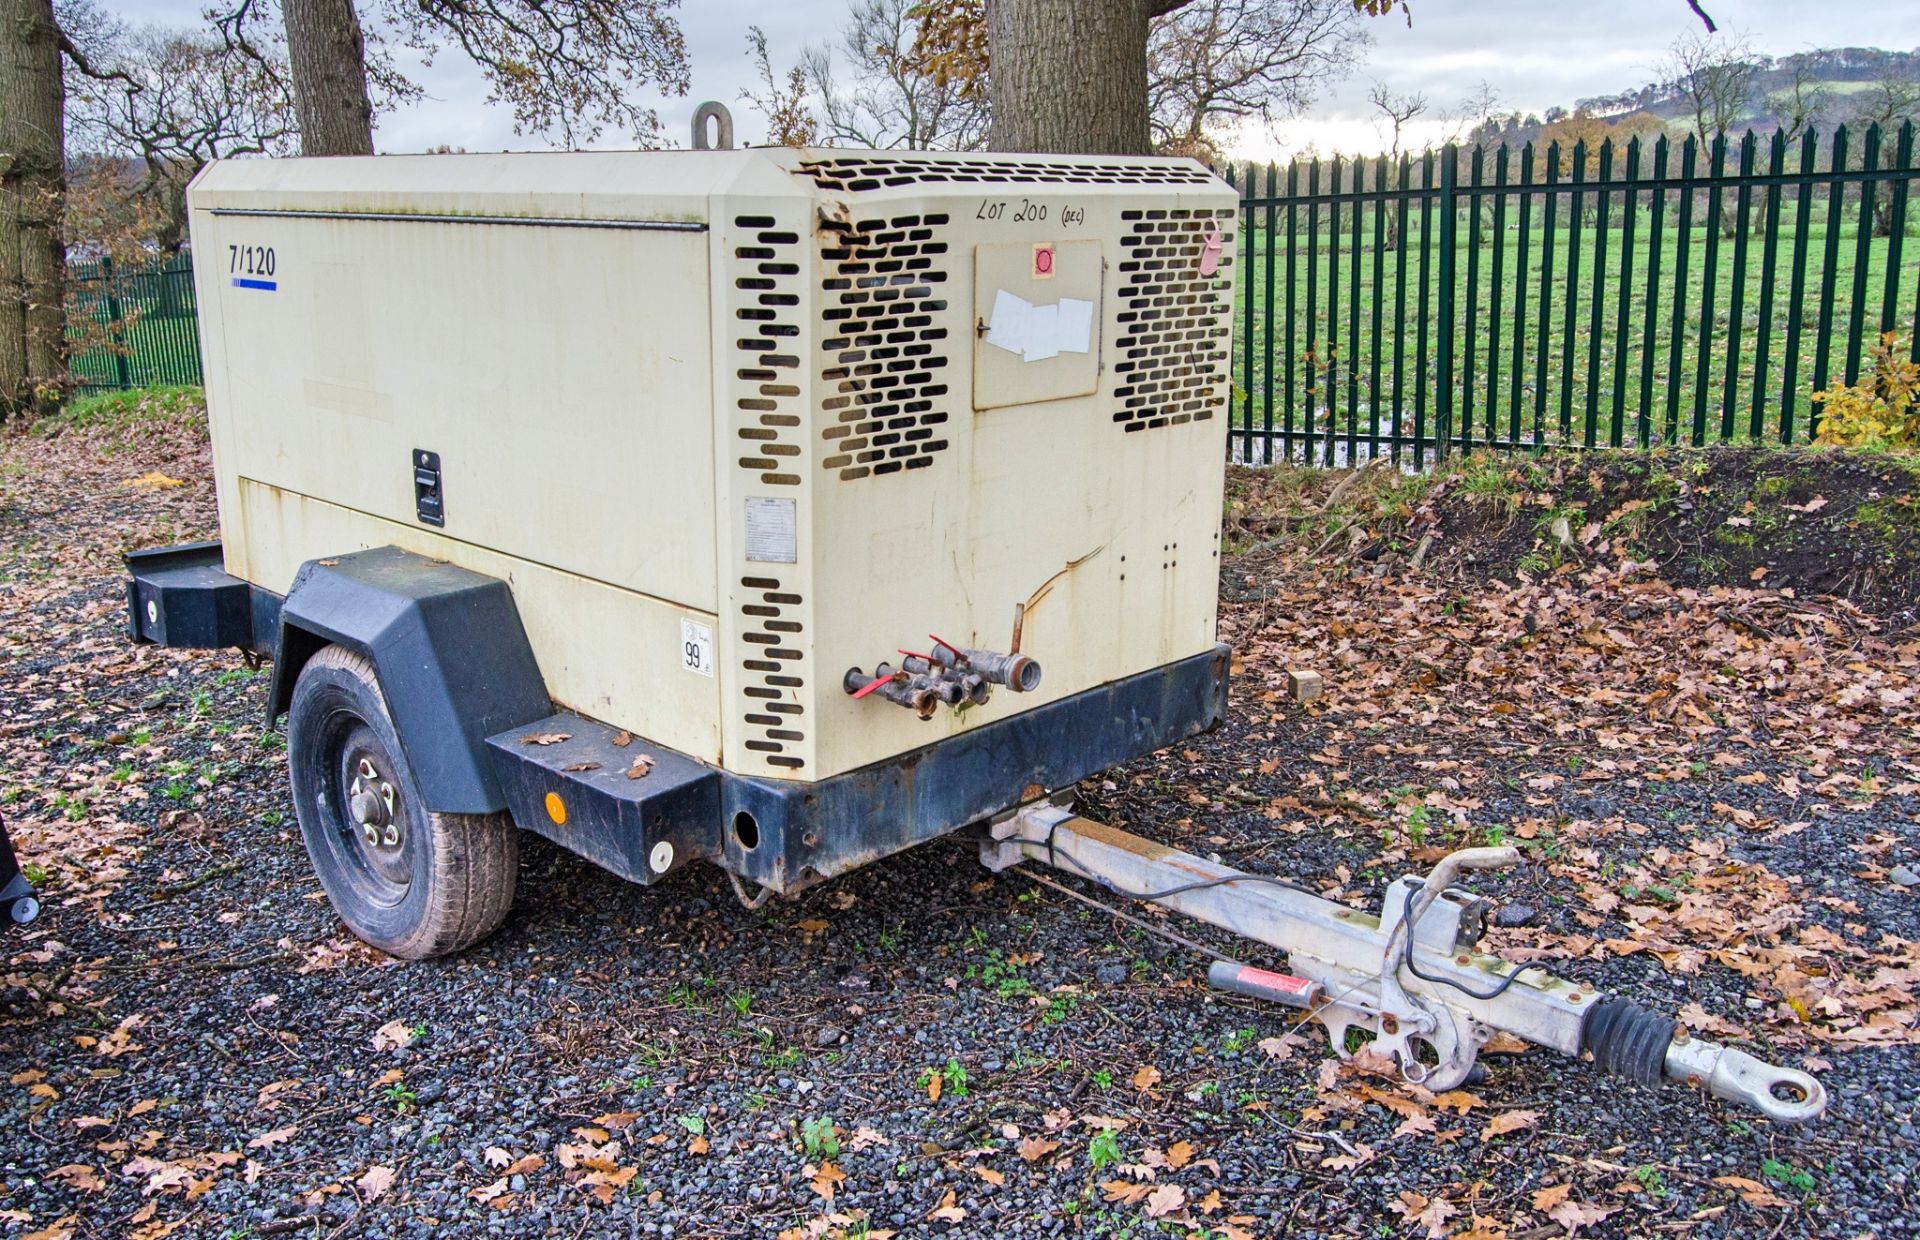 Doosan 7/120 diesel driven fast tow mobile air compressor Year: 2013 S/N: 659477 Recorded Hours: - Image 2 of 11